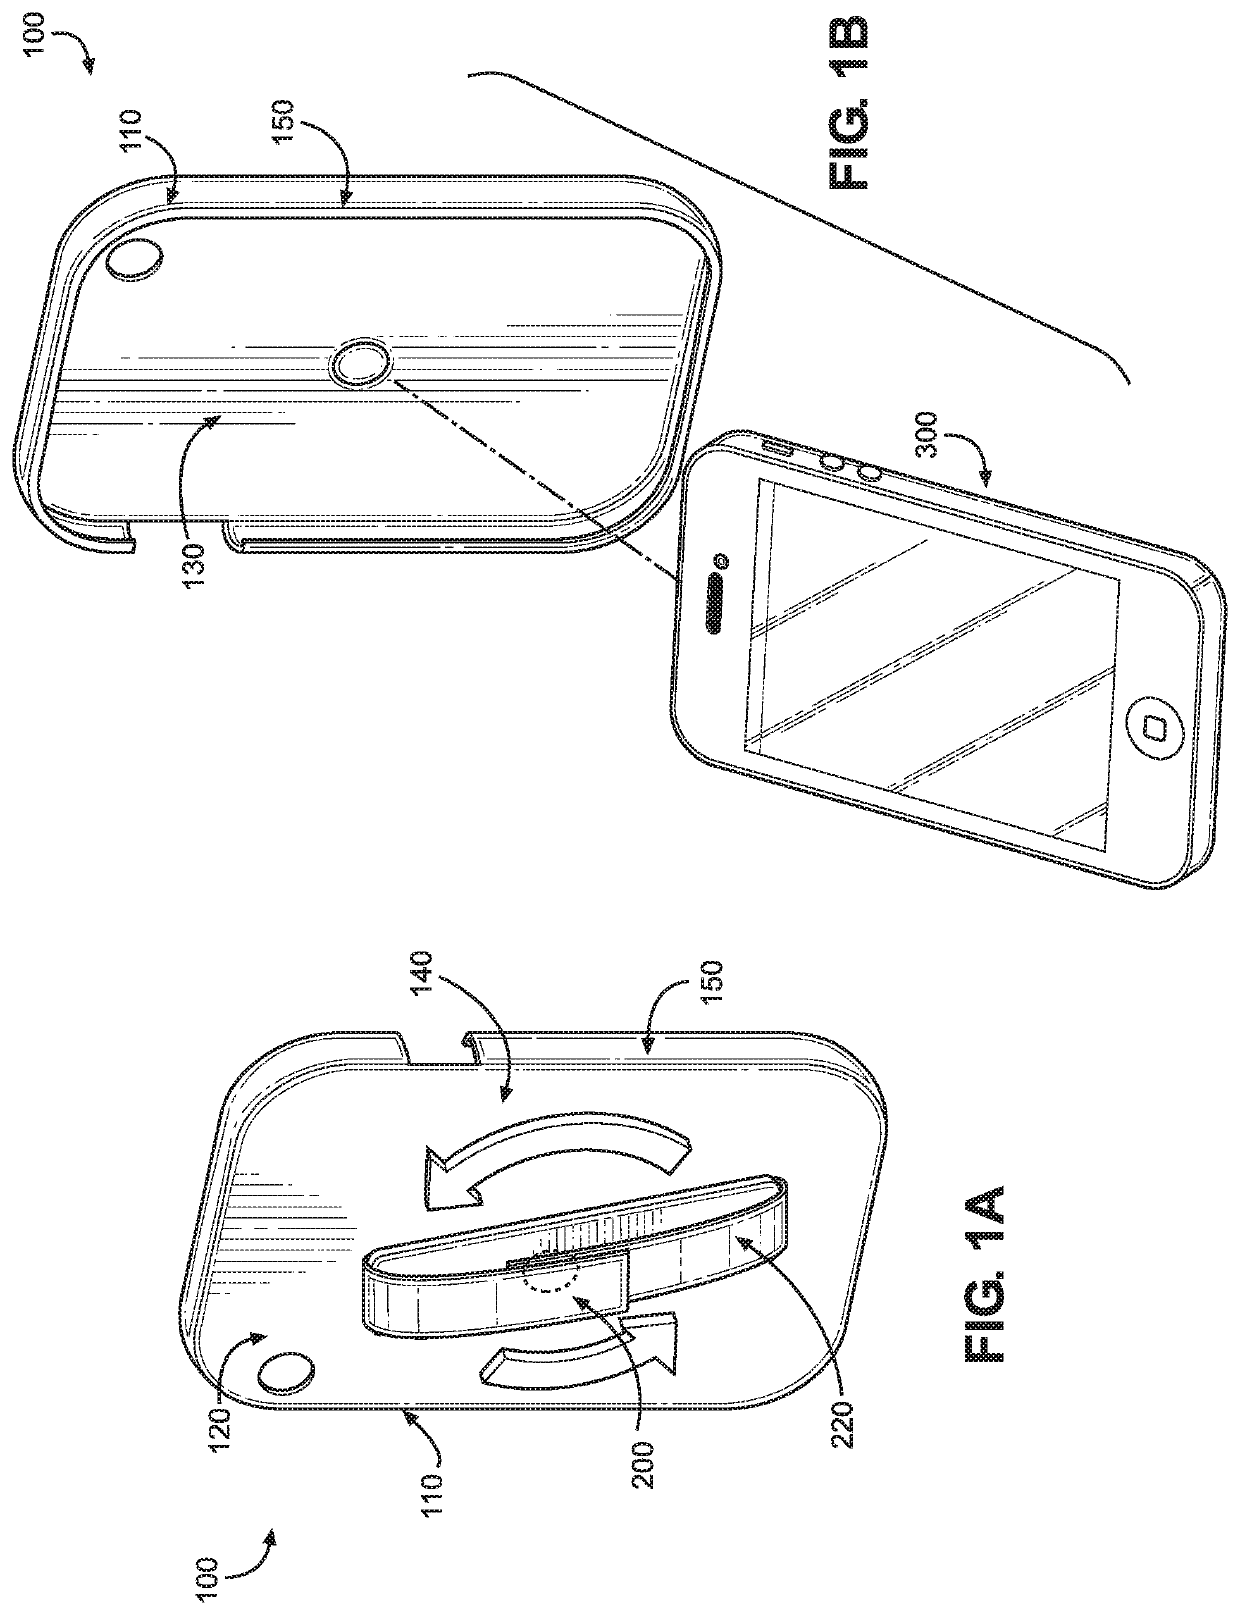 Case for electronic devices